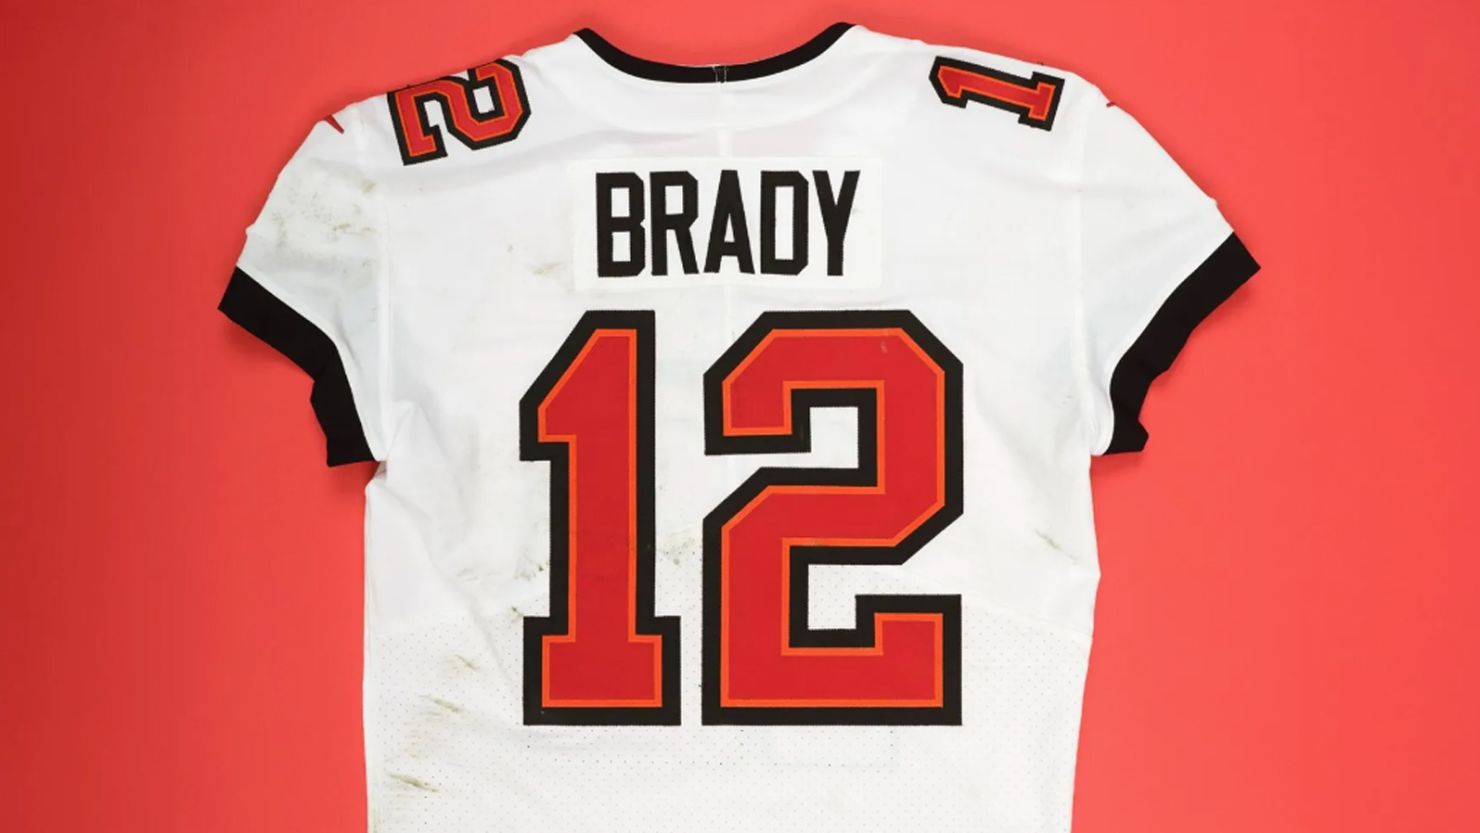 The jersey Tom Brady wore in the last game of his 23-season career.